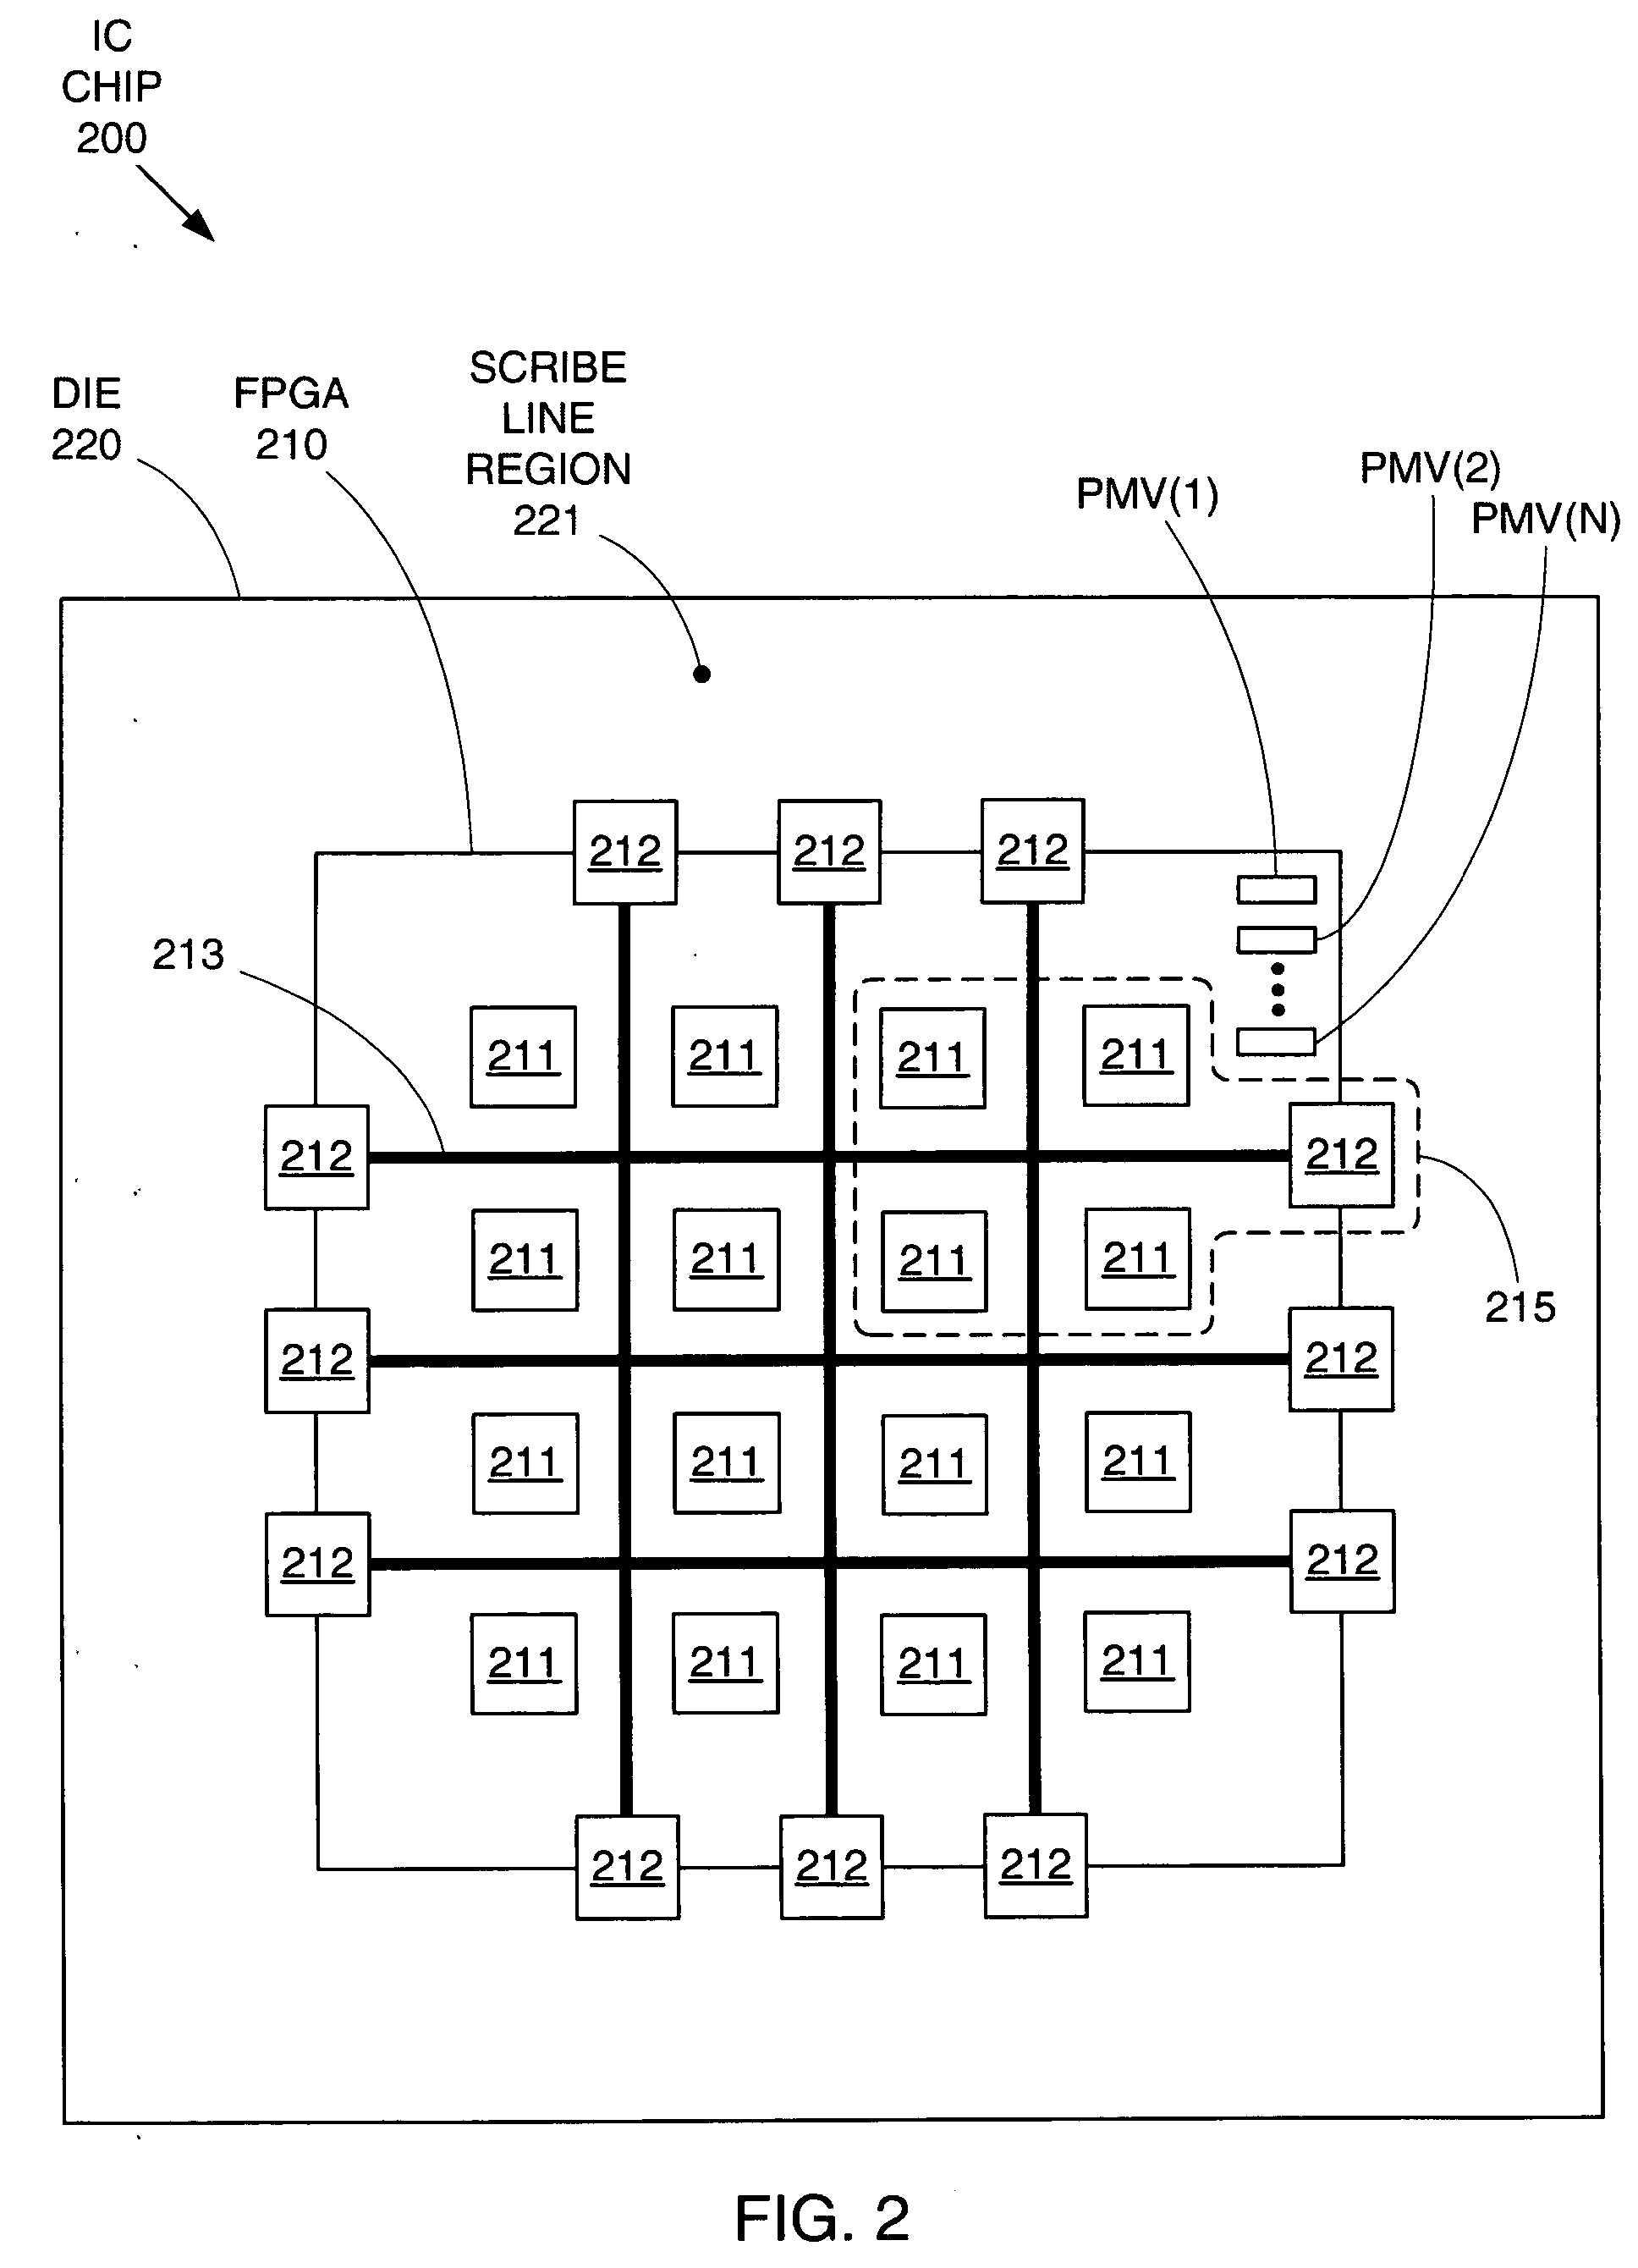 Characterizing circuit performance by separating device and interconnect impact on signal delay